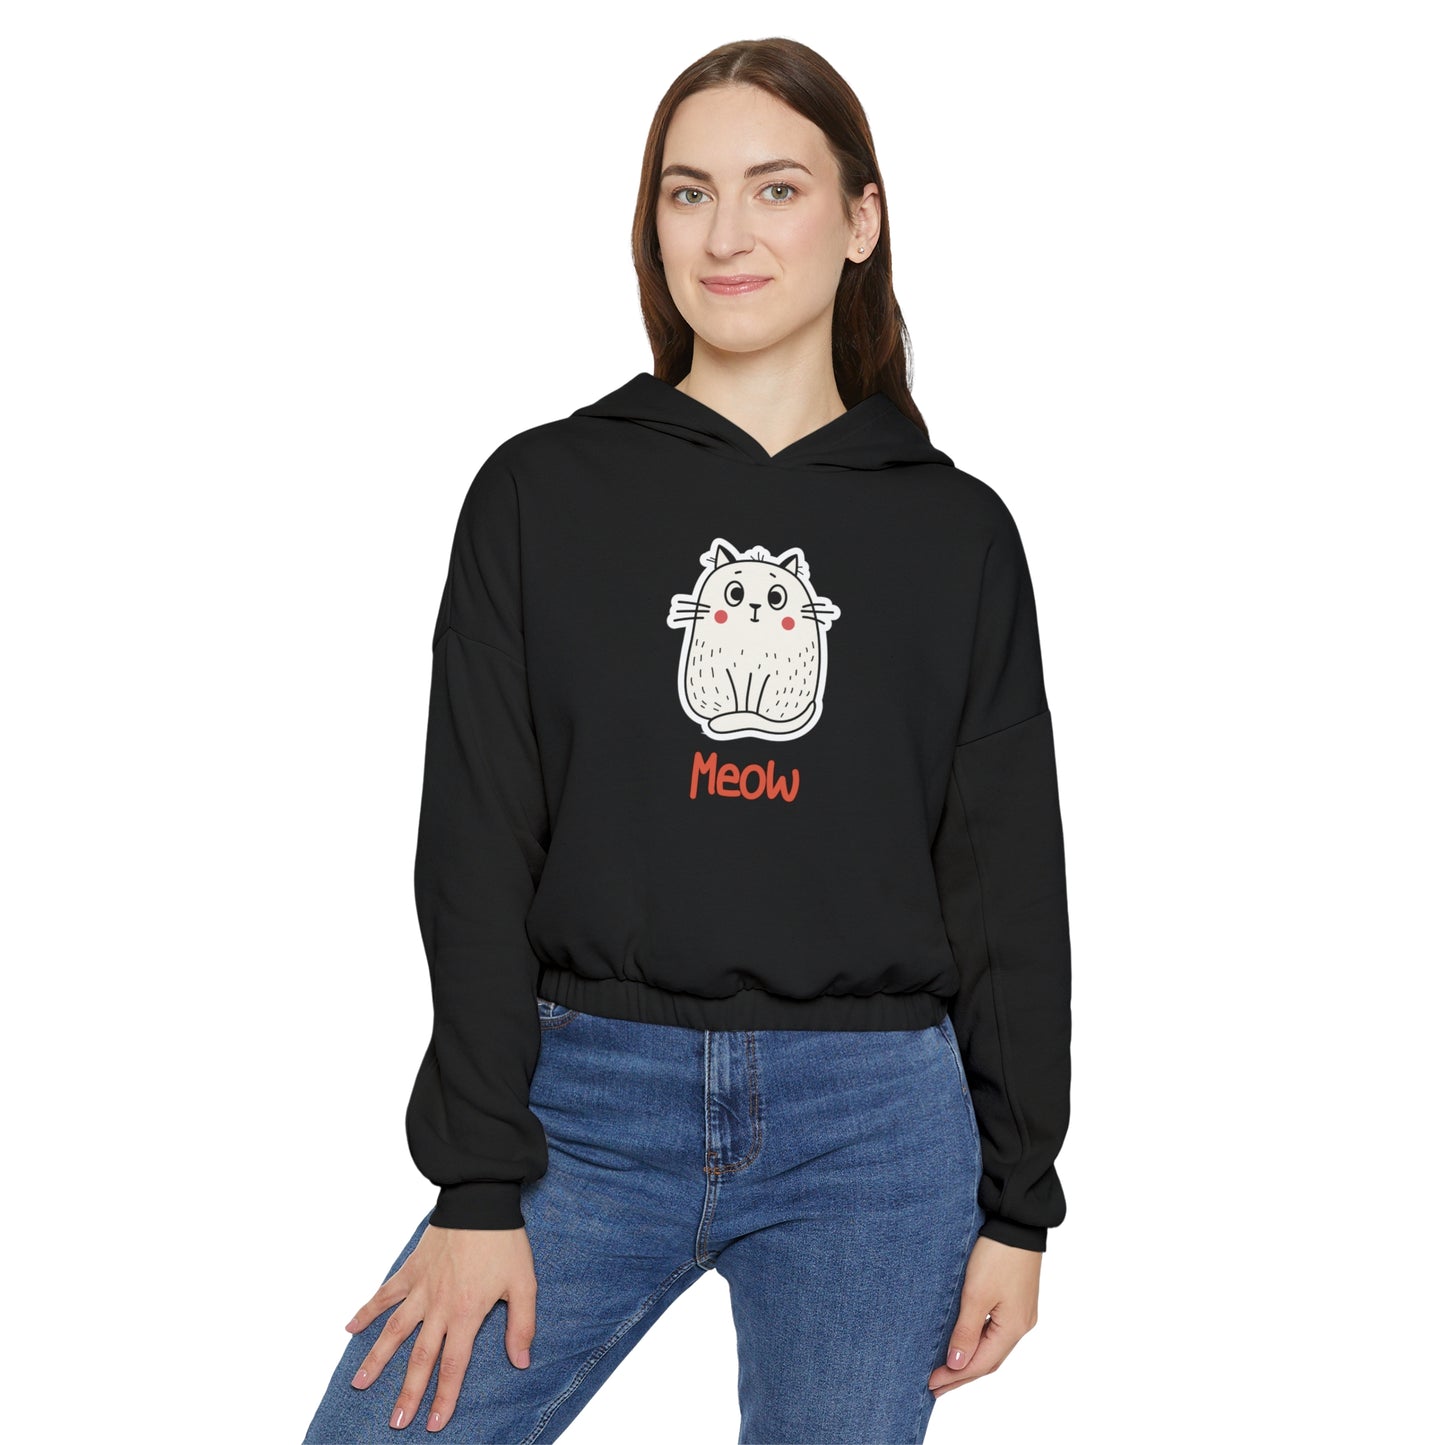 Loki The Cat. Meow.  Women's Cinched Bottom Hoodie